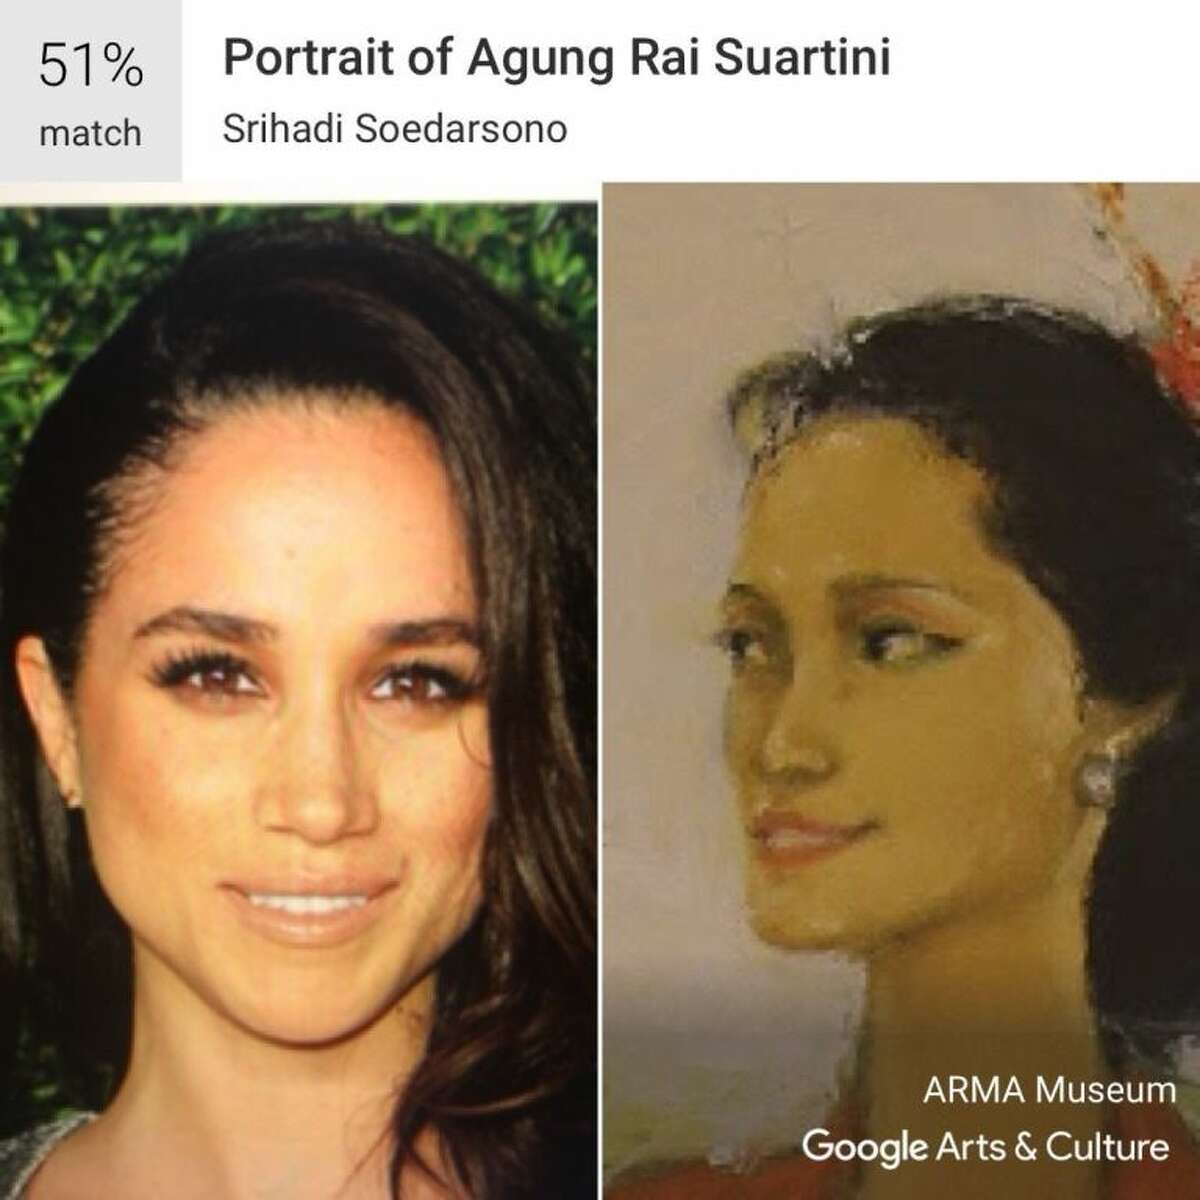 Google's Arts and Culture App compares your selfies to classic works of art and provides the best match, like this image of Meghan Markle to Srihadi Soedarsono's "Portrait of Agung Rai Suartini."